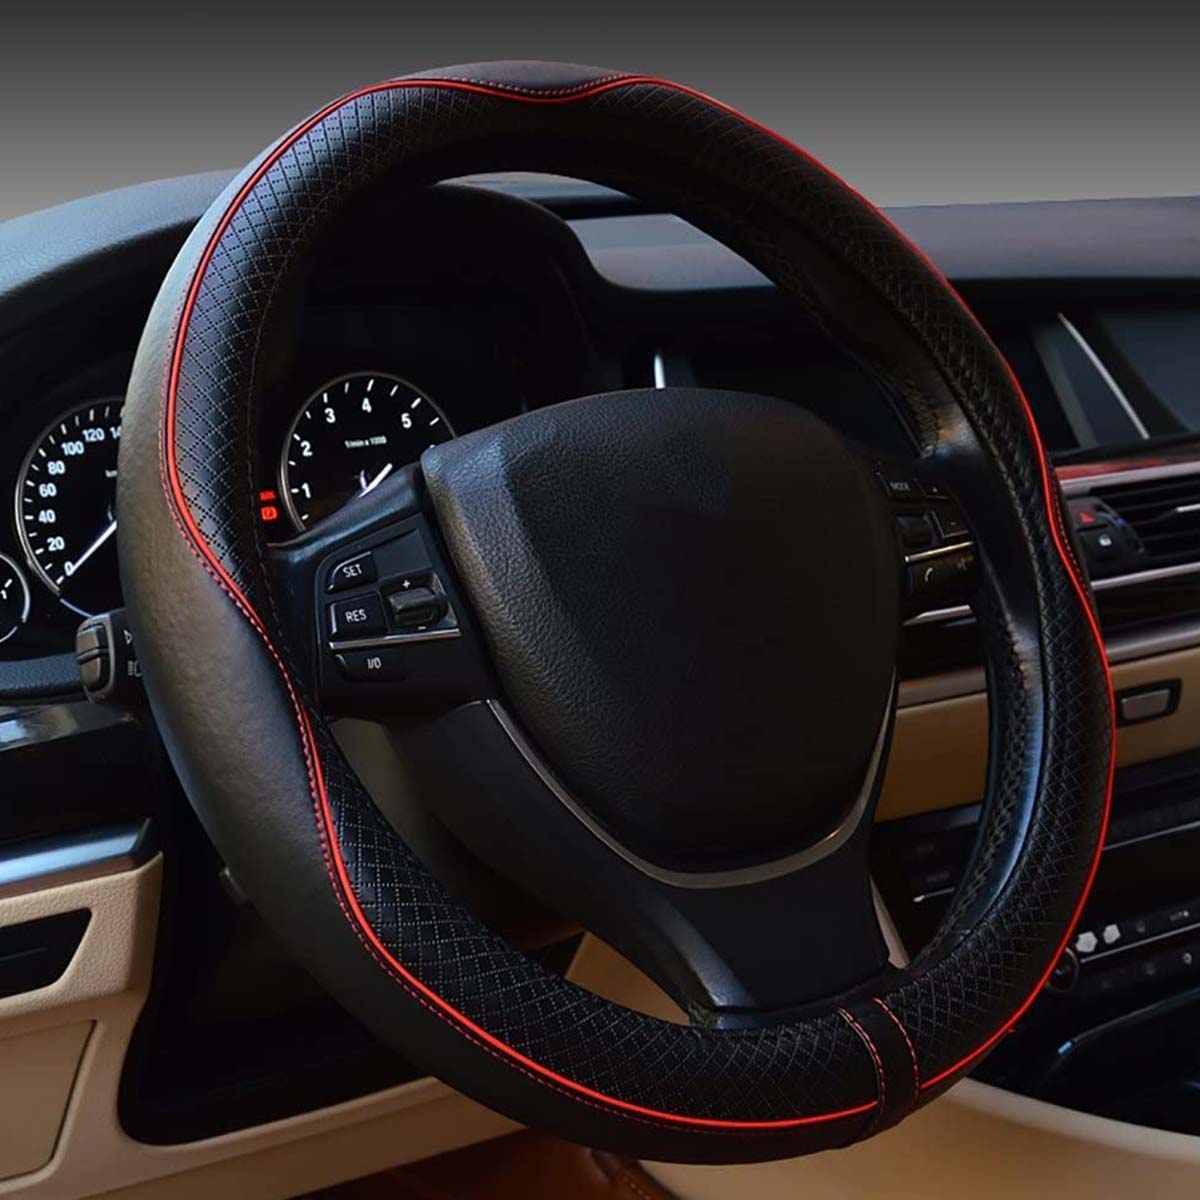 Car Steering Wheel Cover, Custom For Your Cars, Anti-Slip, Safety, Soft, Breathable, Heavy Duty, Thick, Full Surround, Sports Style, Car Accessories MS18990